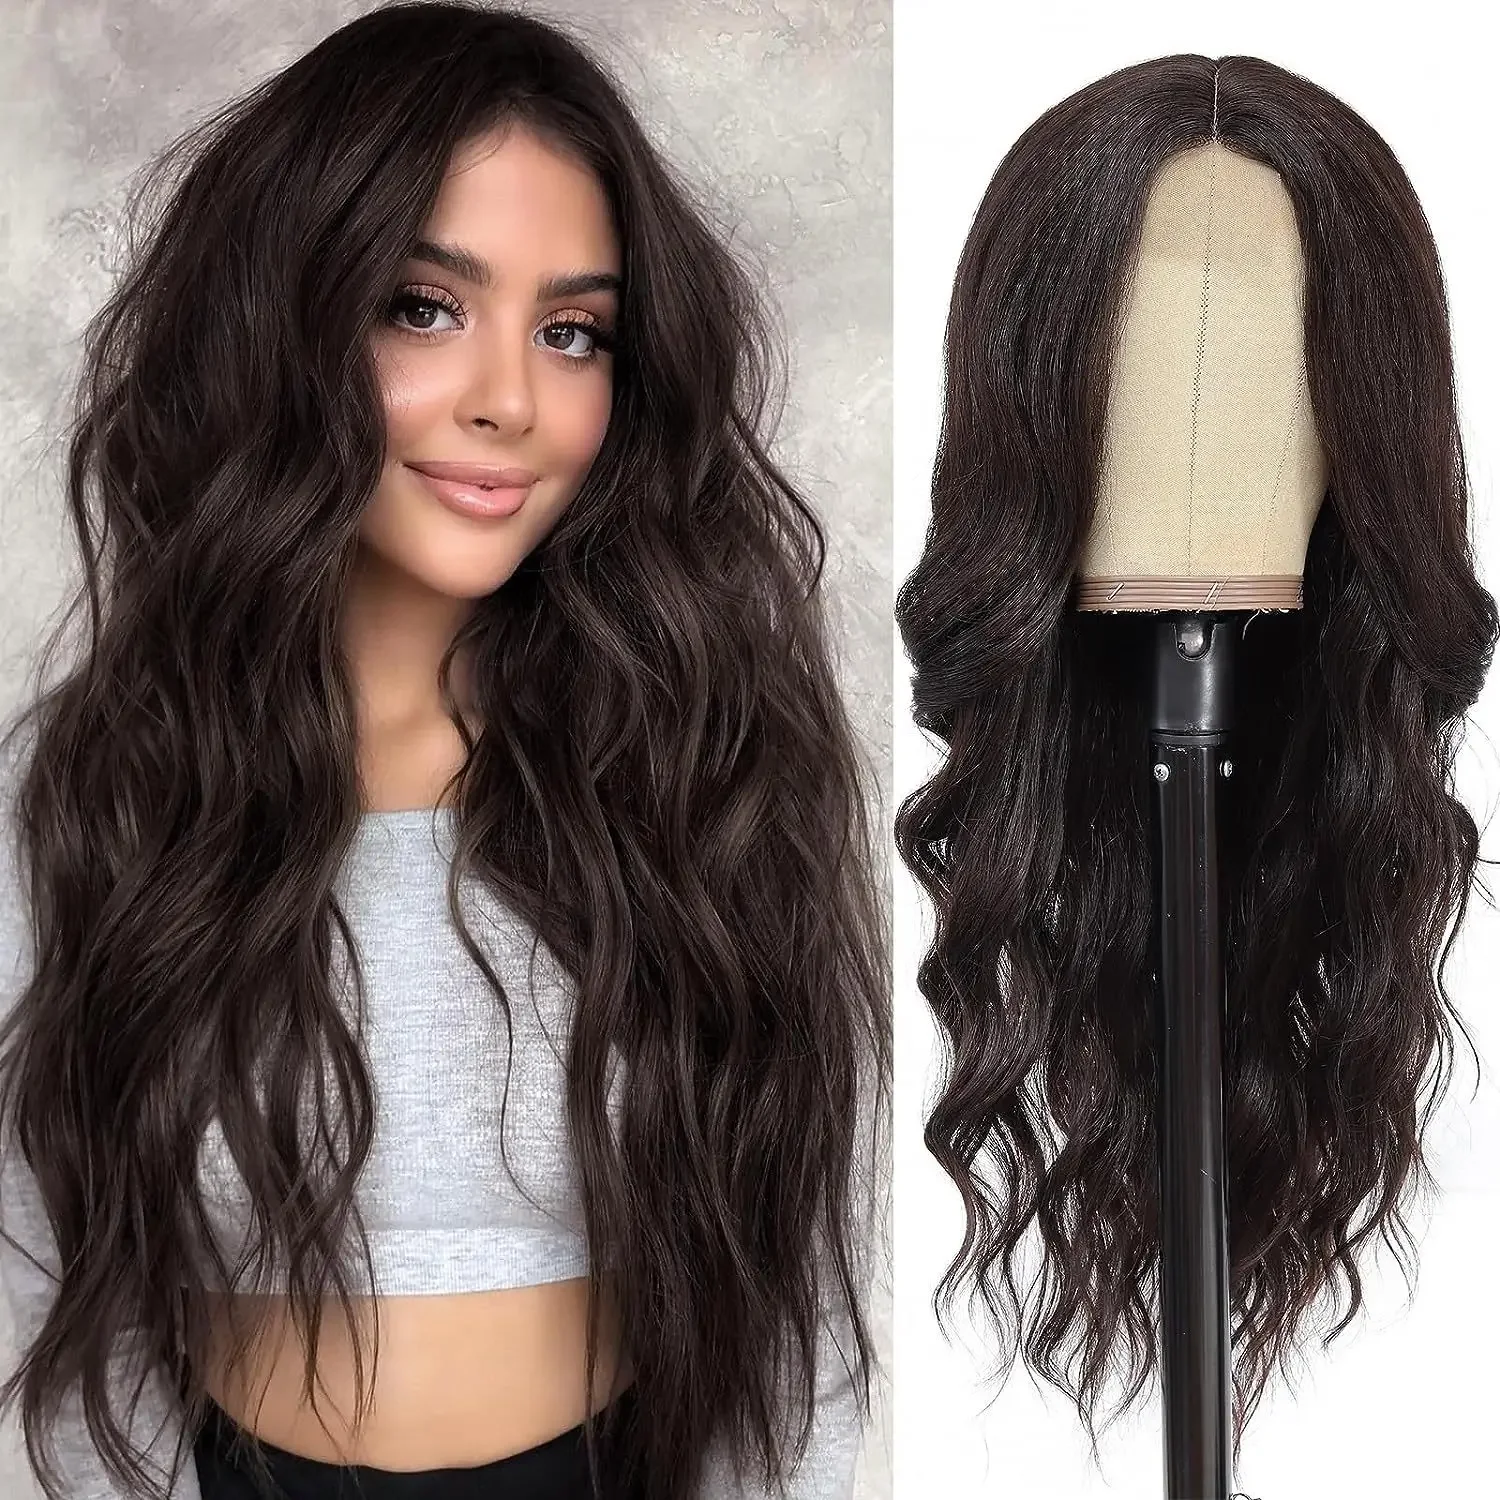 

Long Dark Brown Wavy Wig for Women Synthetic Curly Middle Part Wig Natural Looking Heat Resistant Fibre for Daily Party Use 26In